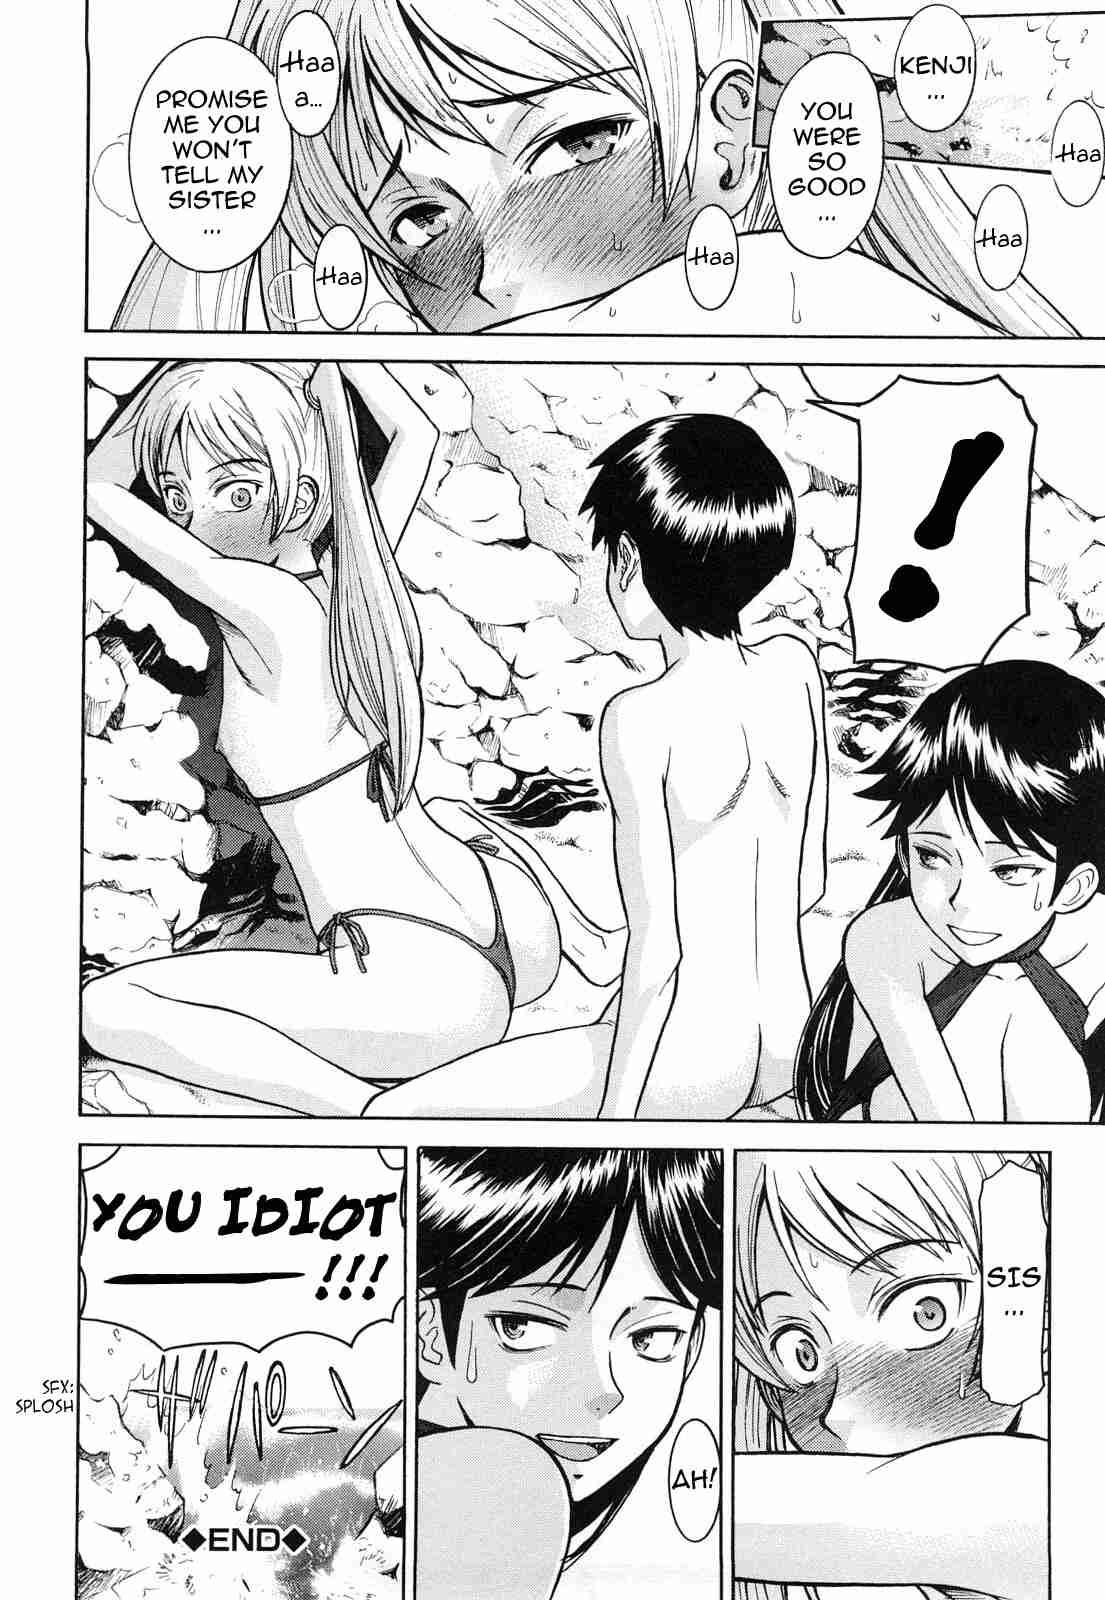 Reading Sex Education Hentai 1 Sex Education [end] Page 206 Hentai